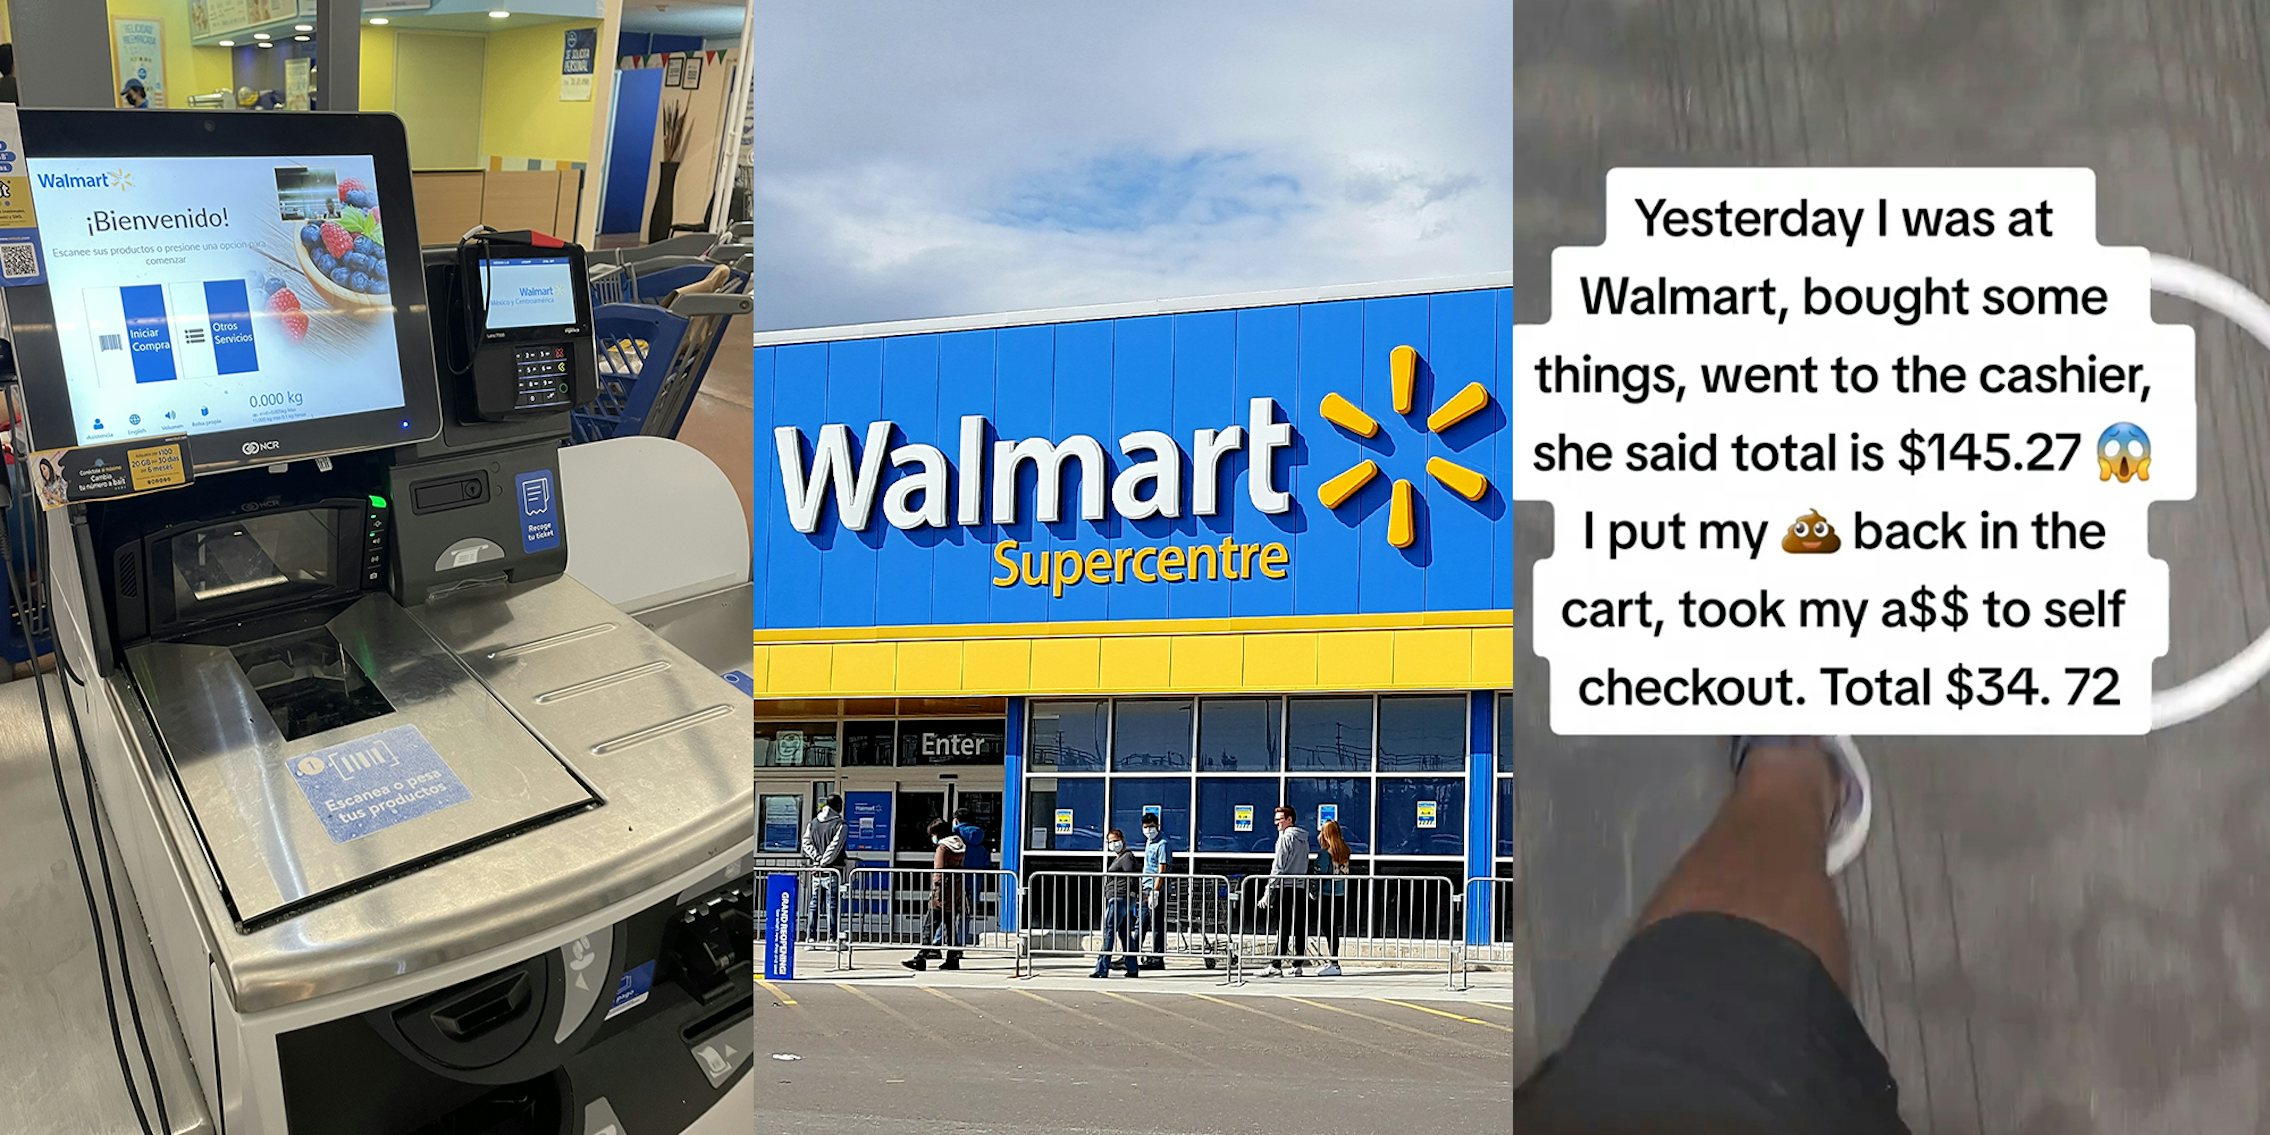 Walmart Customer Brags About Not Scanning Self-Checkout Items